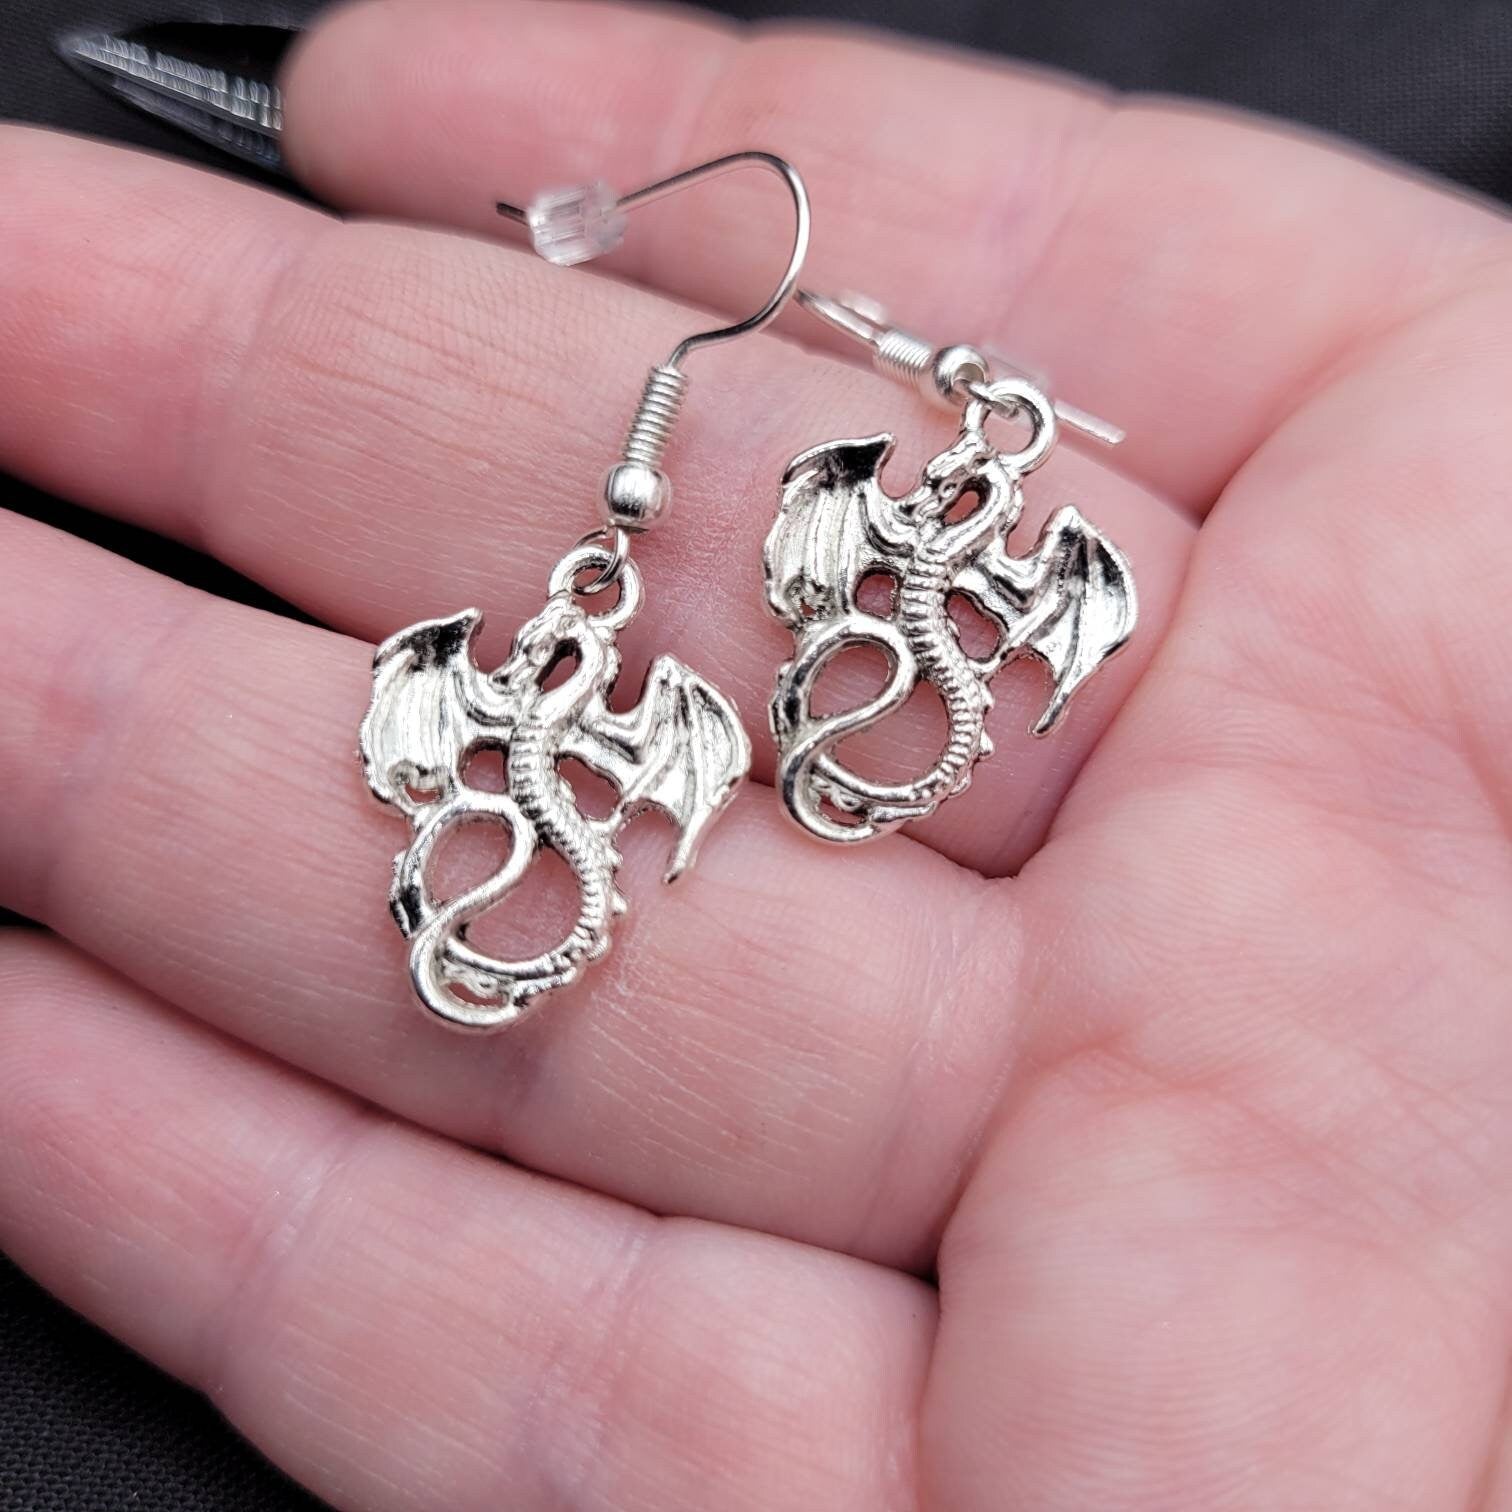 Fantasy DnD Cosplay RPG Silver Dragon Wyvern Earrings and Necklace Set